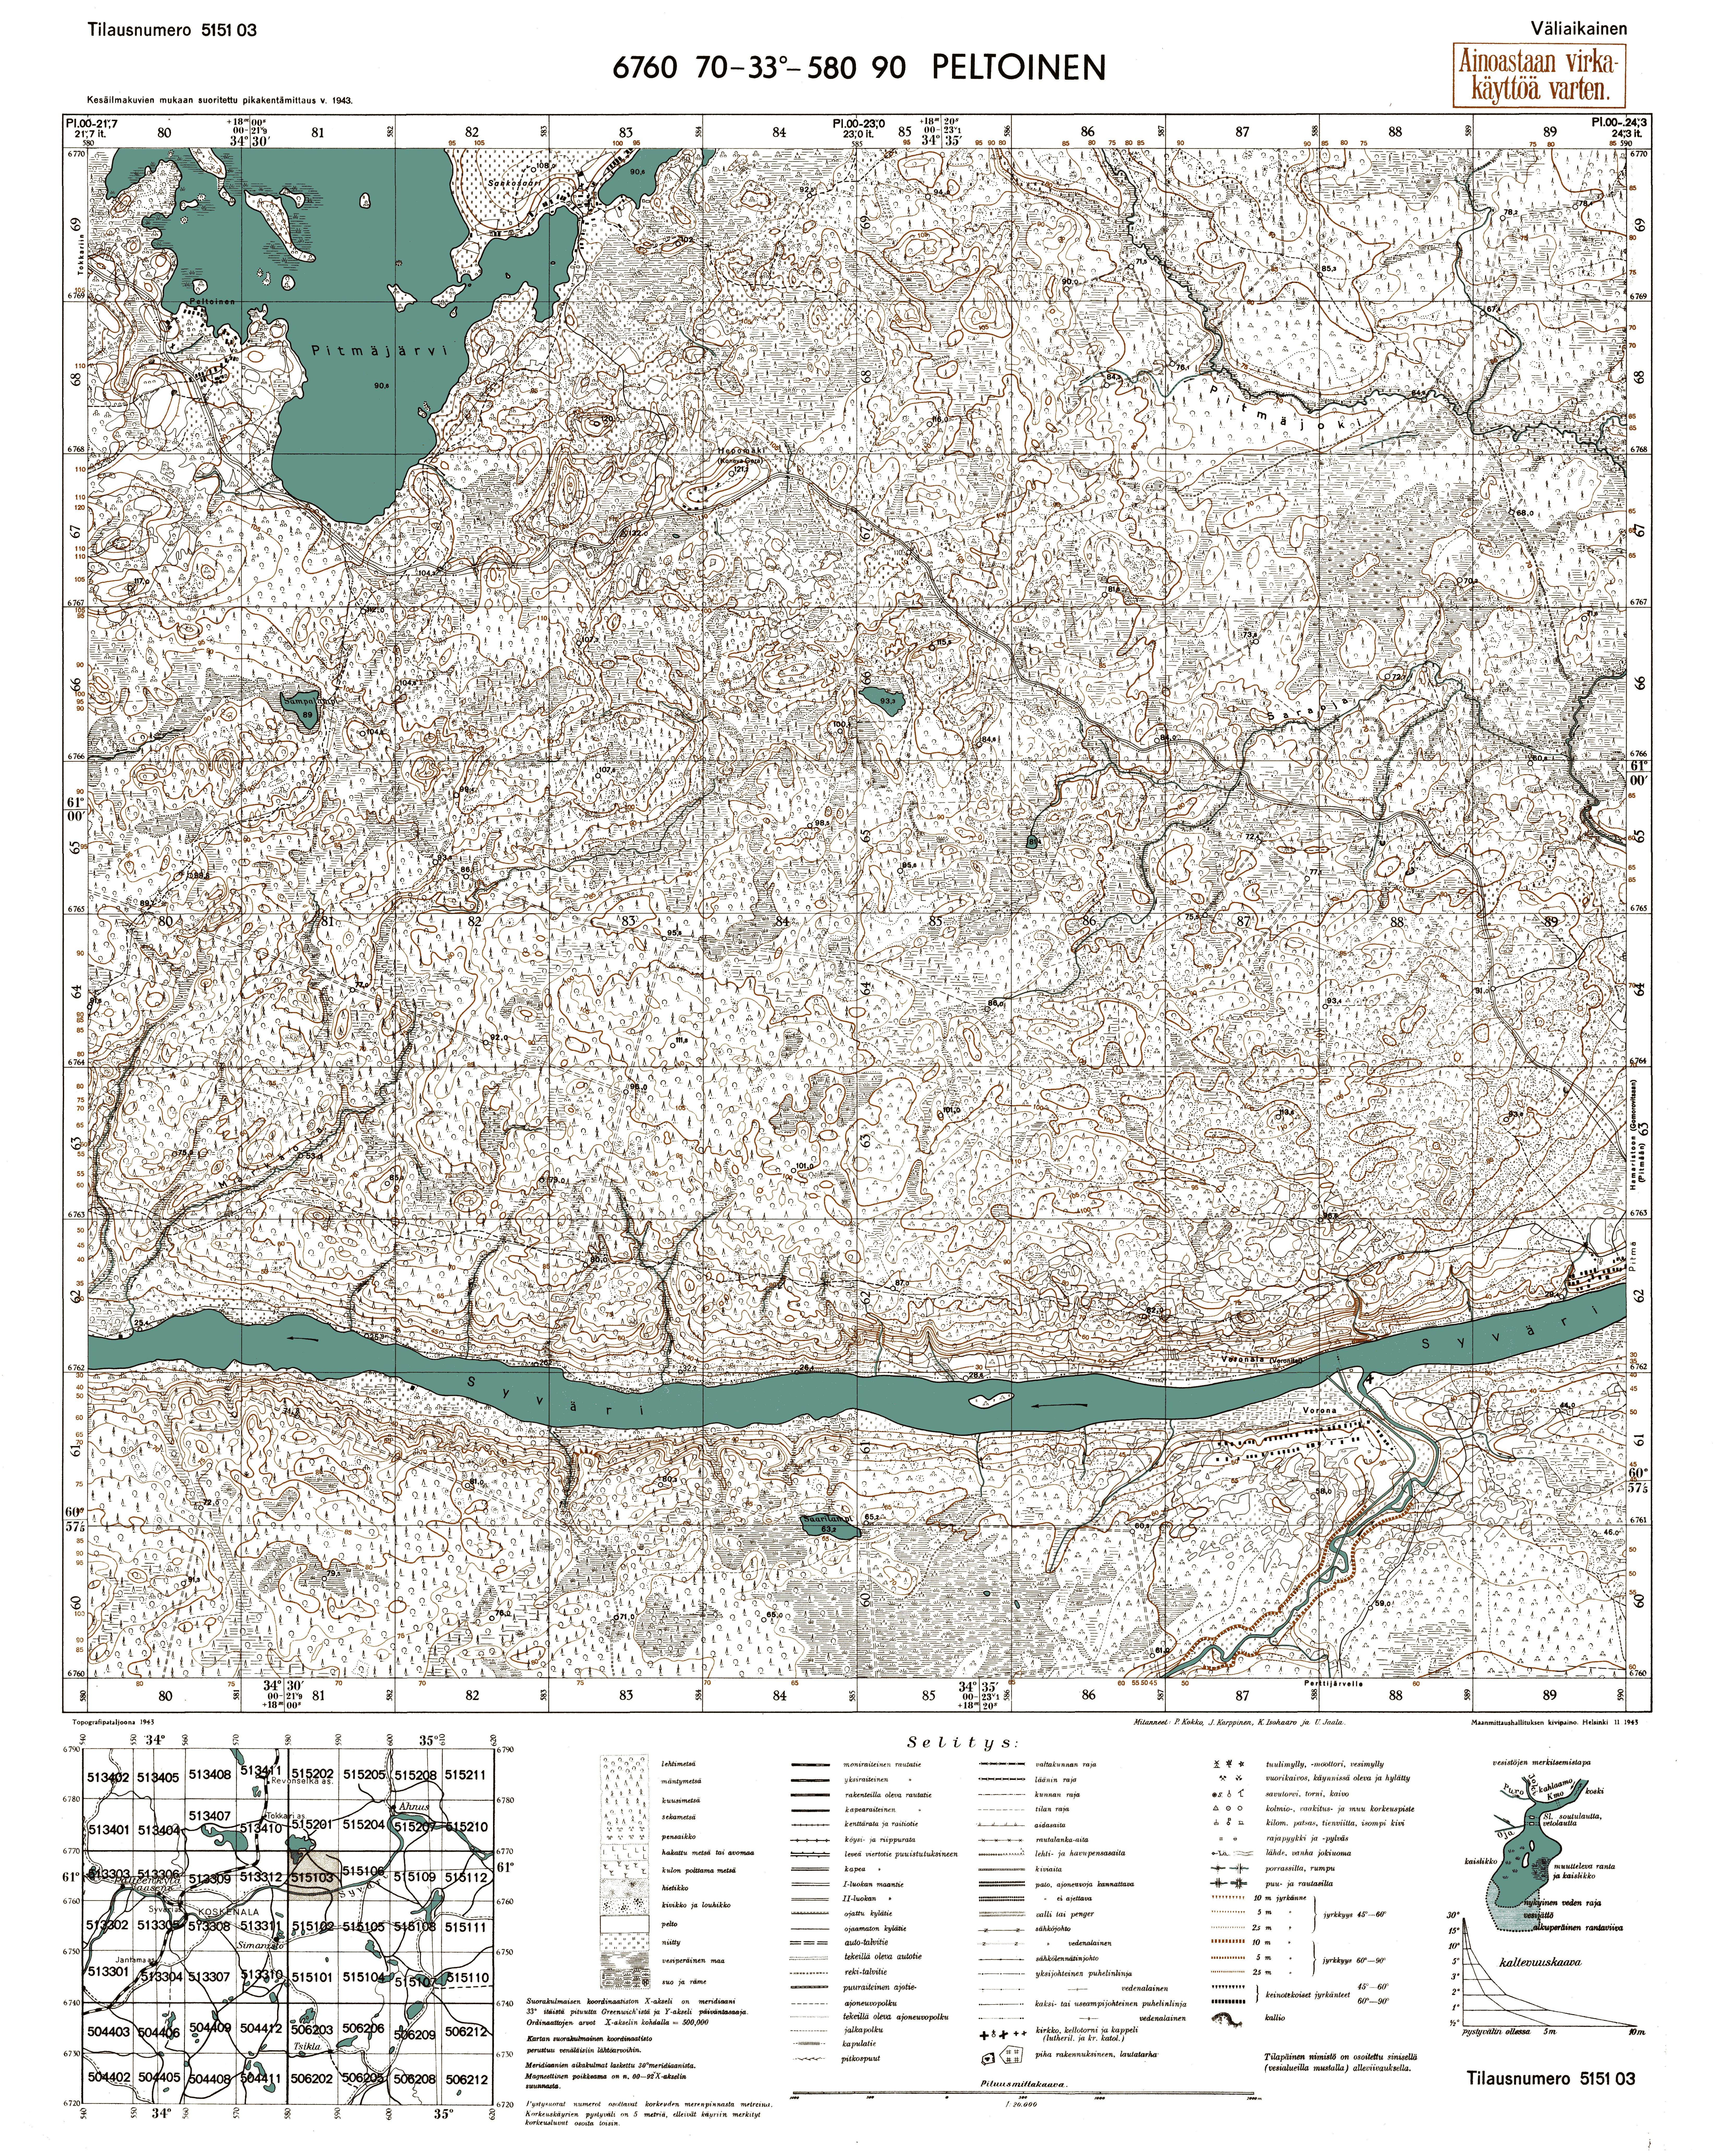 Peldoži. Peltoinen. Topografikartta 515103. Topographic map from 1943. Use the zooming tool to explore in higher level of detail. Obtain as a quality print or high resolution image